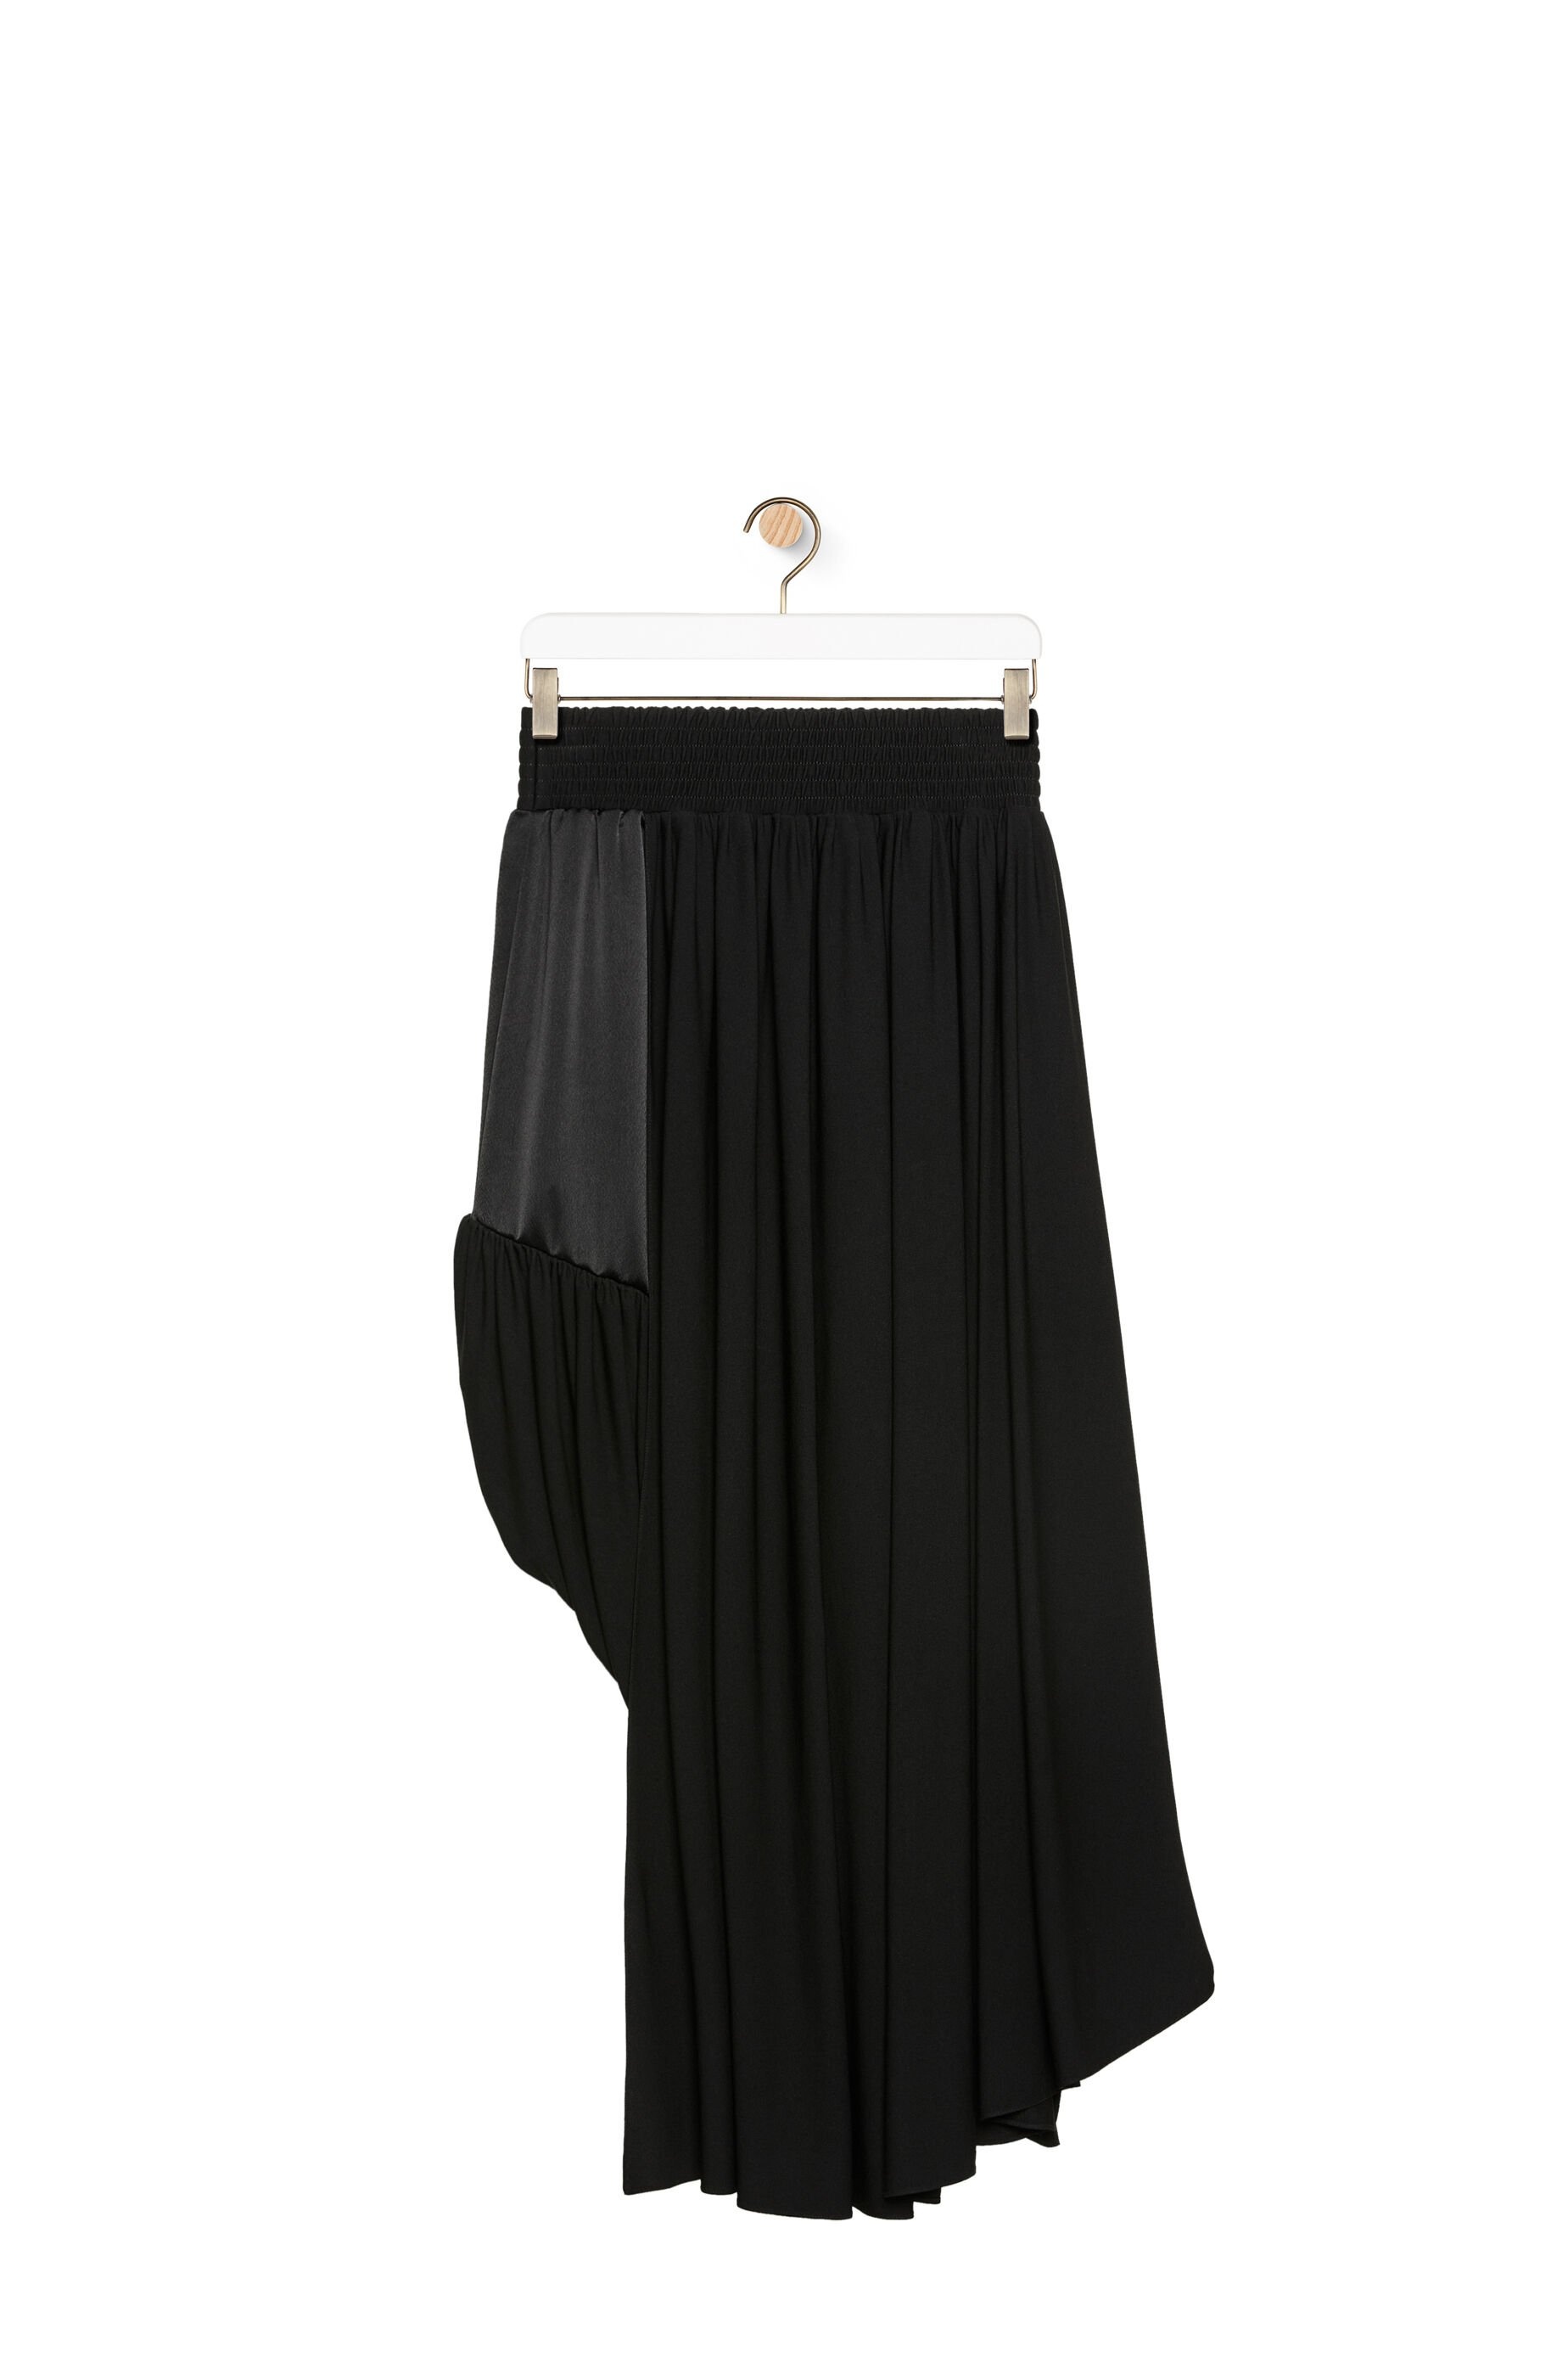 Draped skirt in crepe jersey and crepe satin - 2